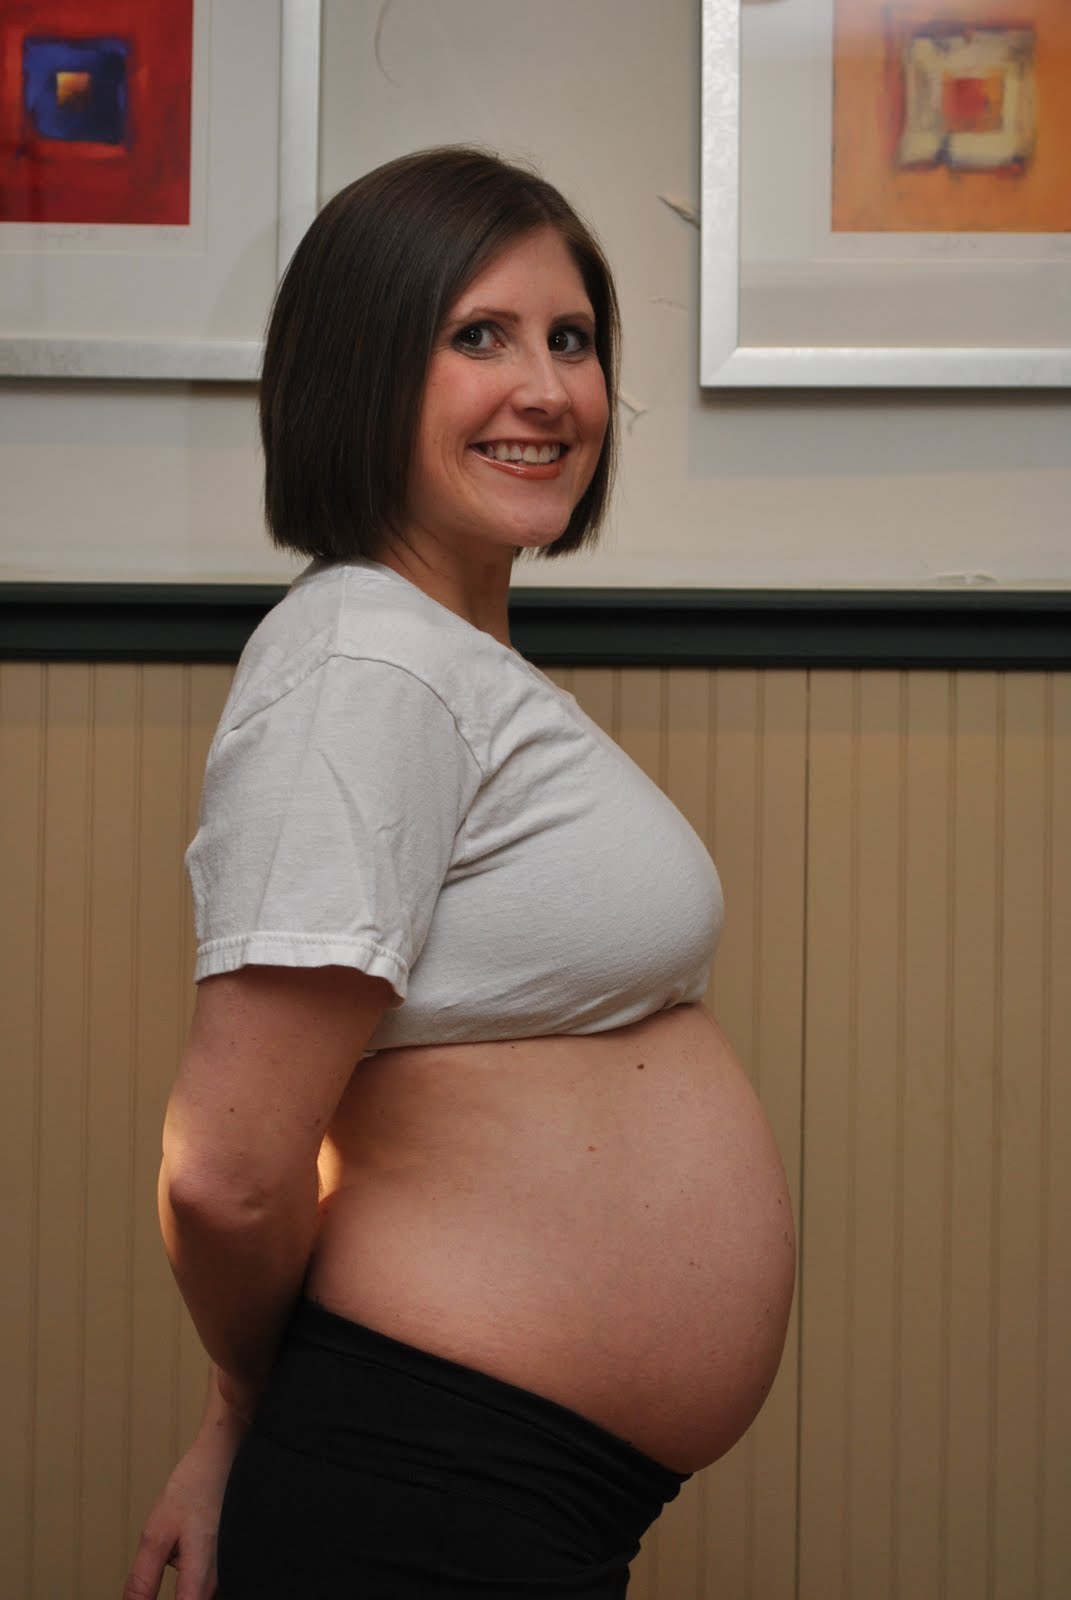 And here I am now, 34-weeks pregnant with Harper: